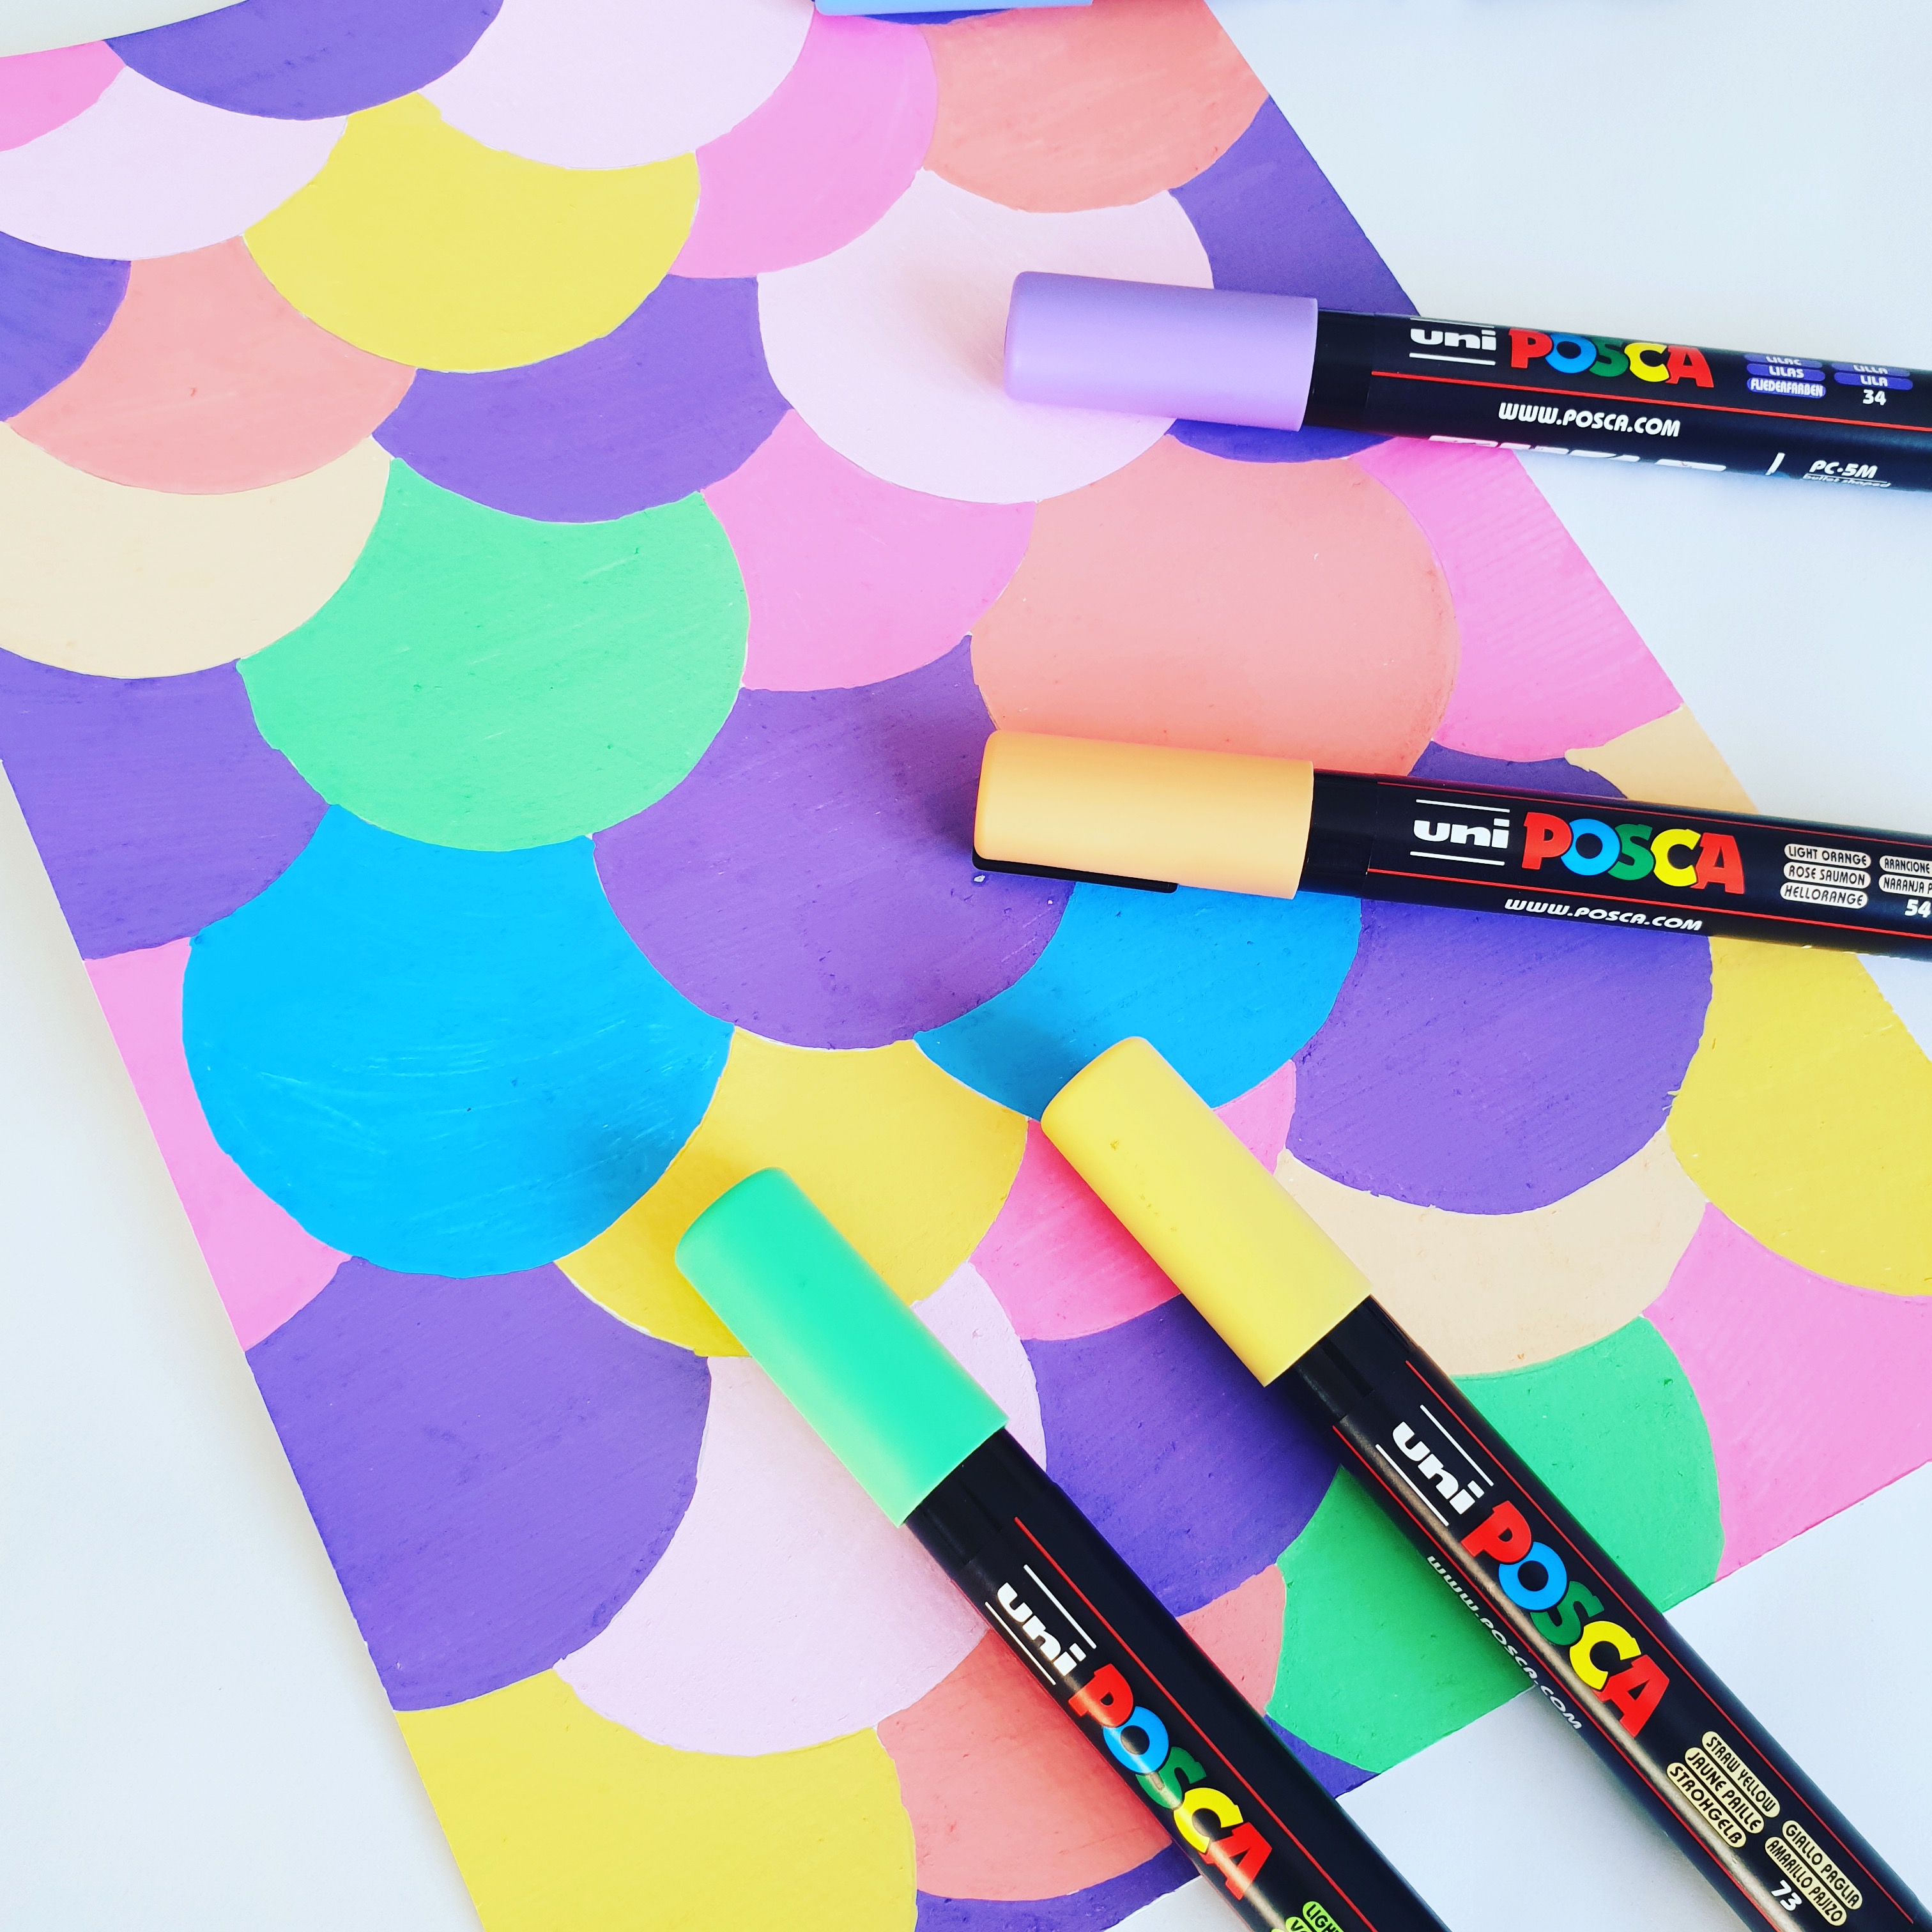 POSCA PENS. IDEAL FOR ALL TYPES OF ART. - Clarkes